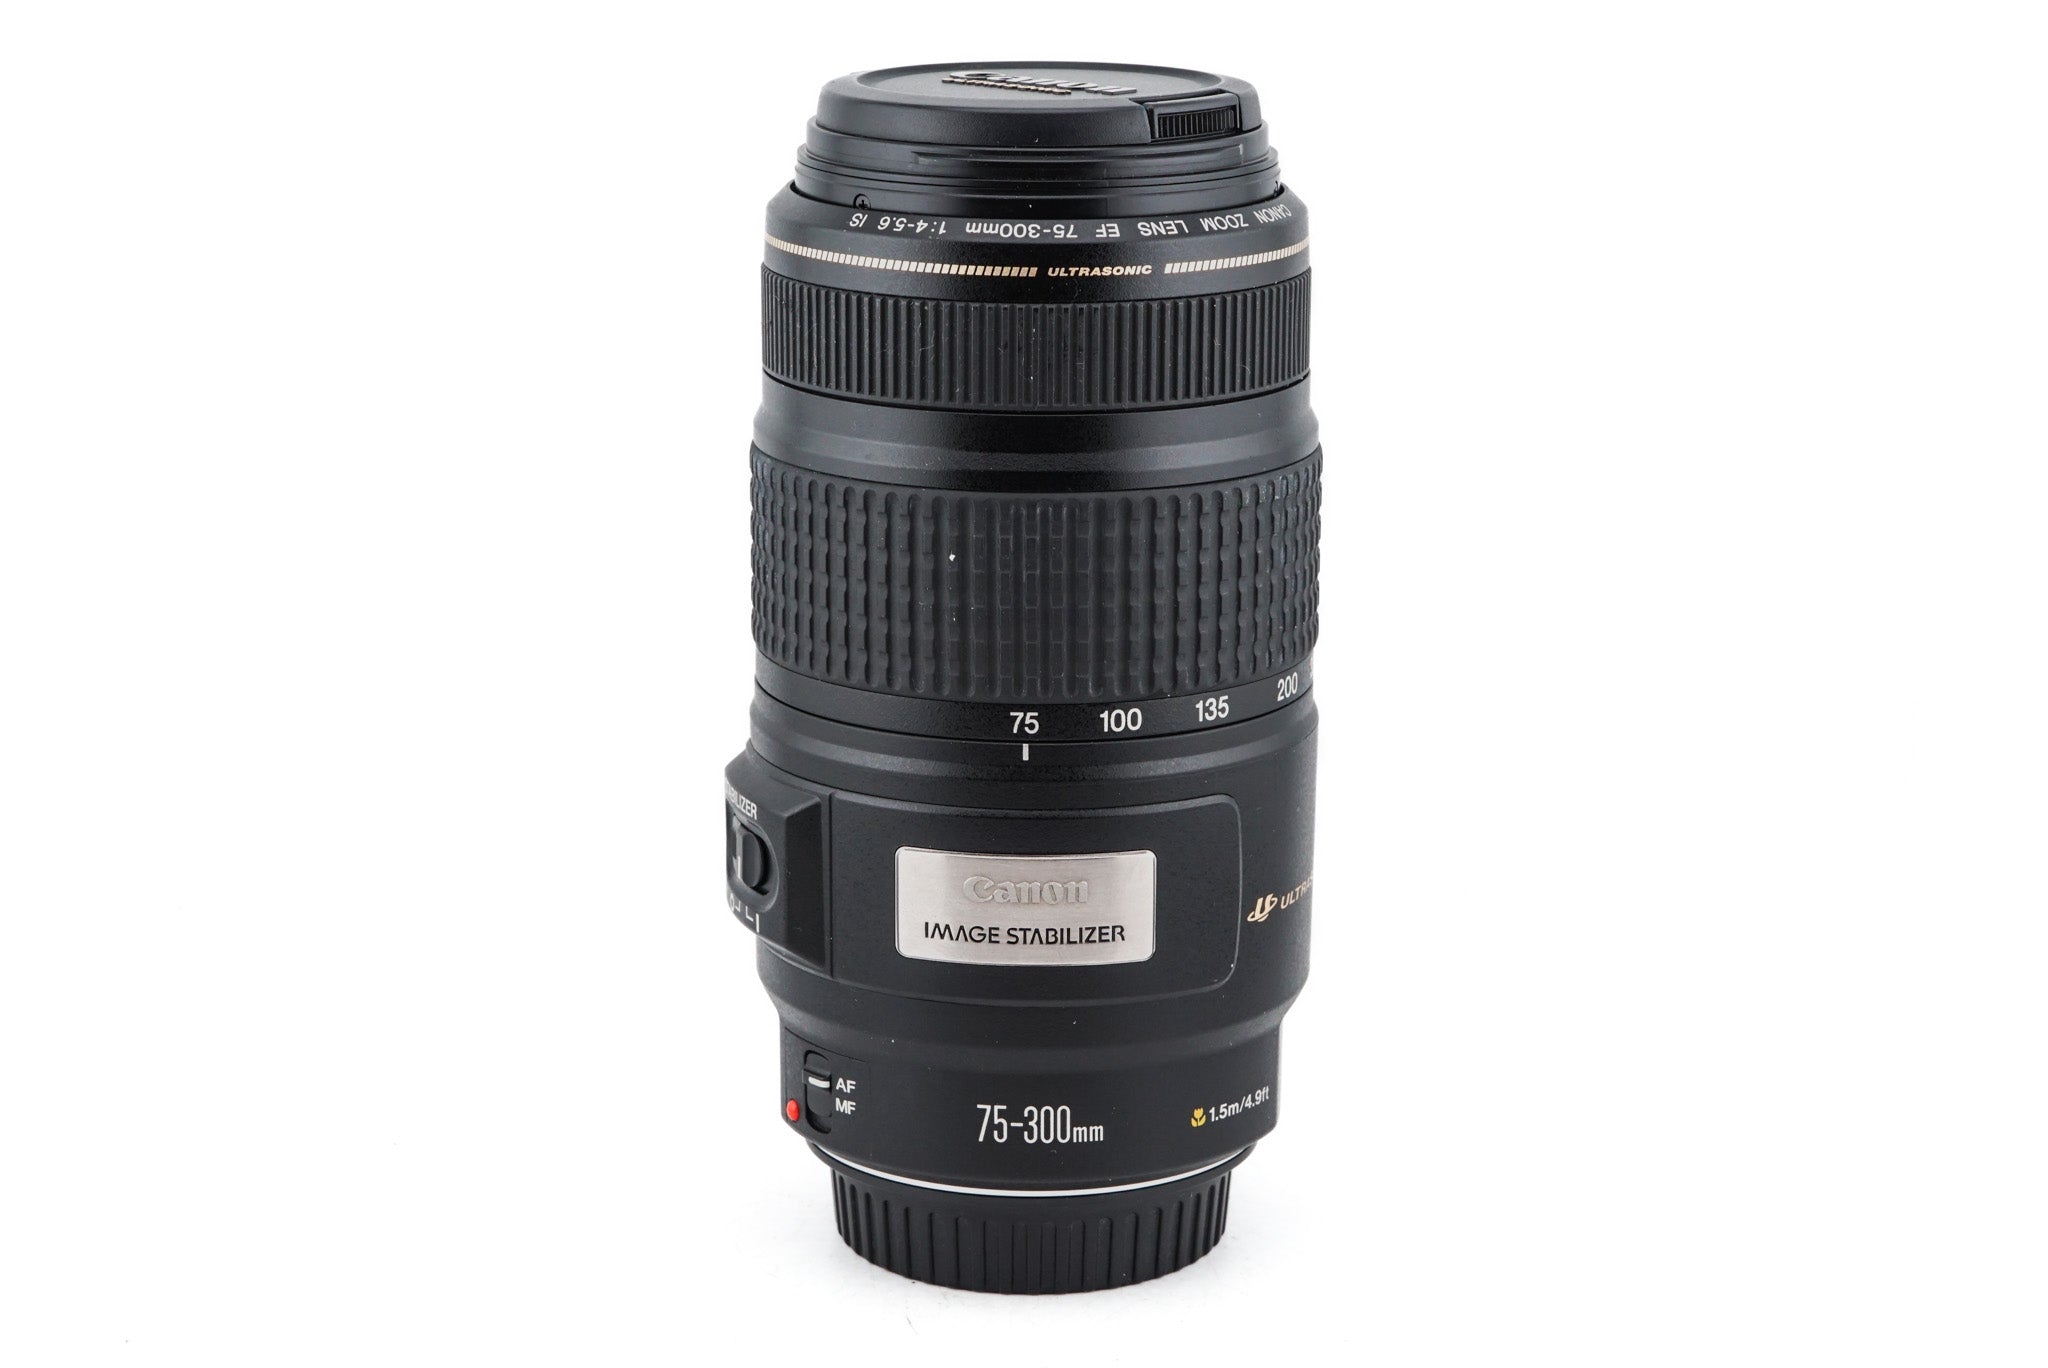 Canon 75-300mm f4-5.6 IS USM - Lens